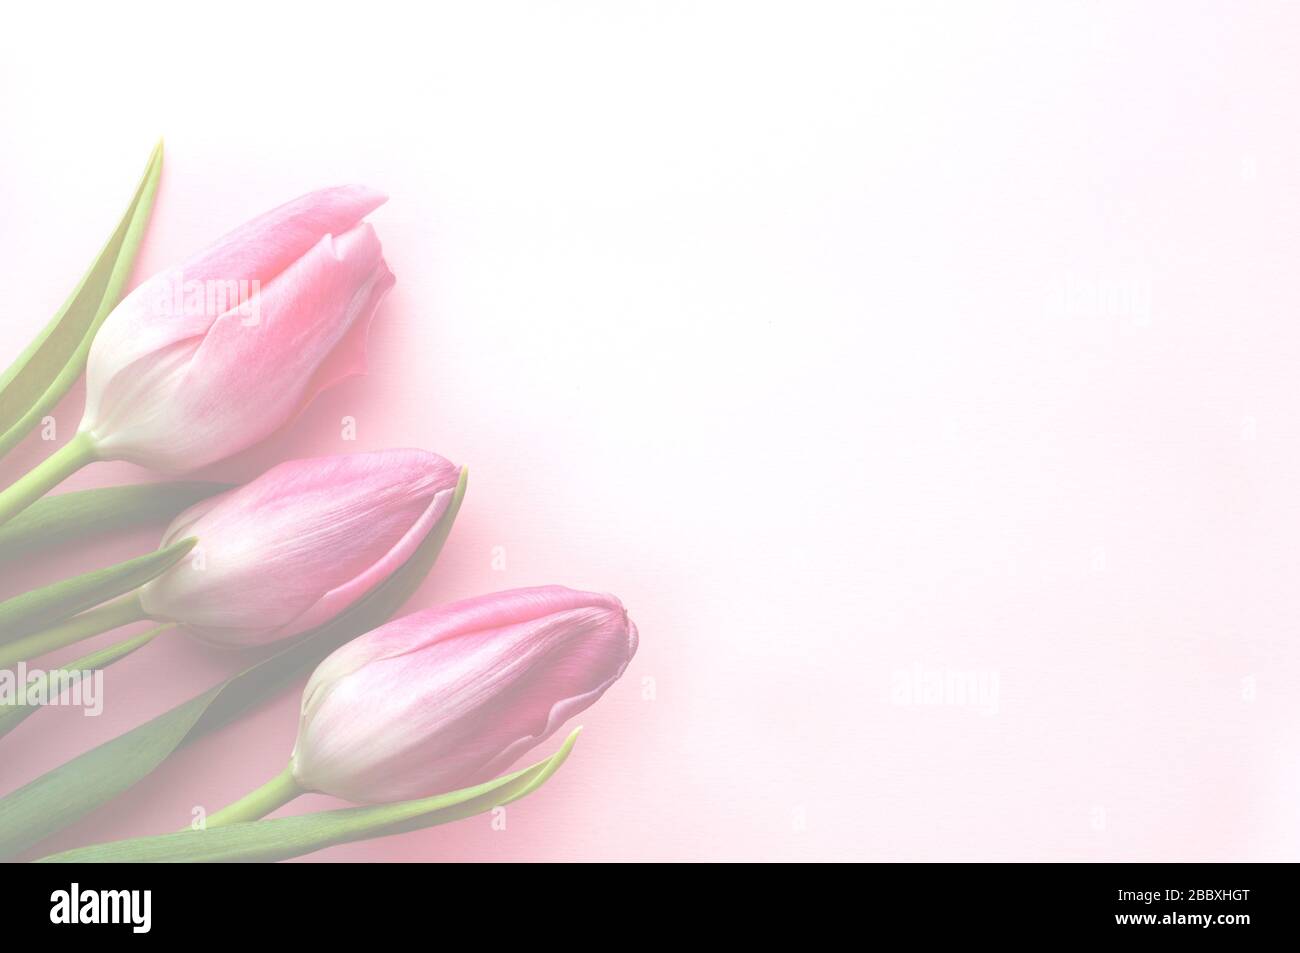 Bouquet of pink spring tulips and place for text for Mother's Day or Women on a pink background. Top view flat style. Stock Photo